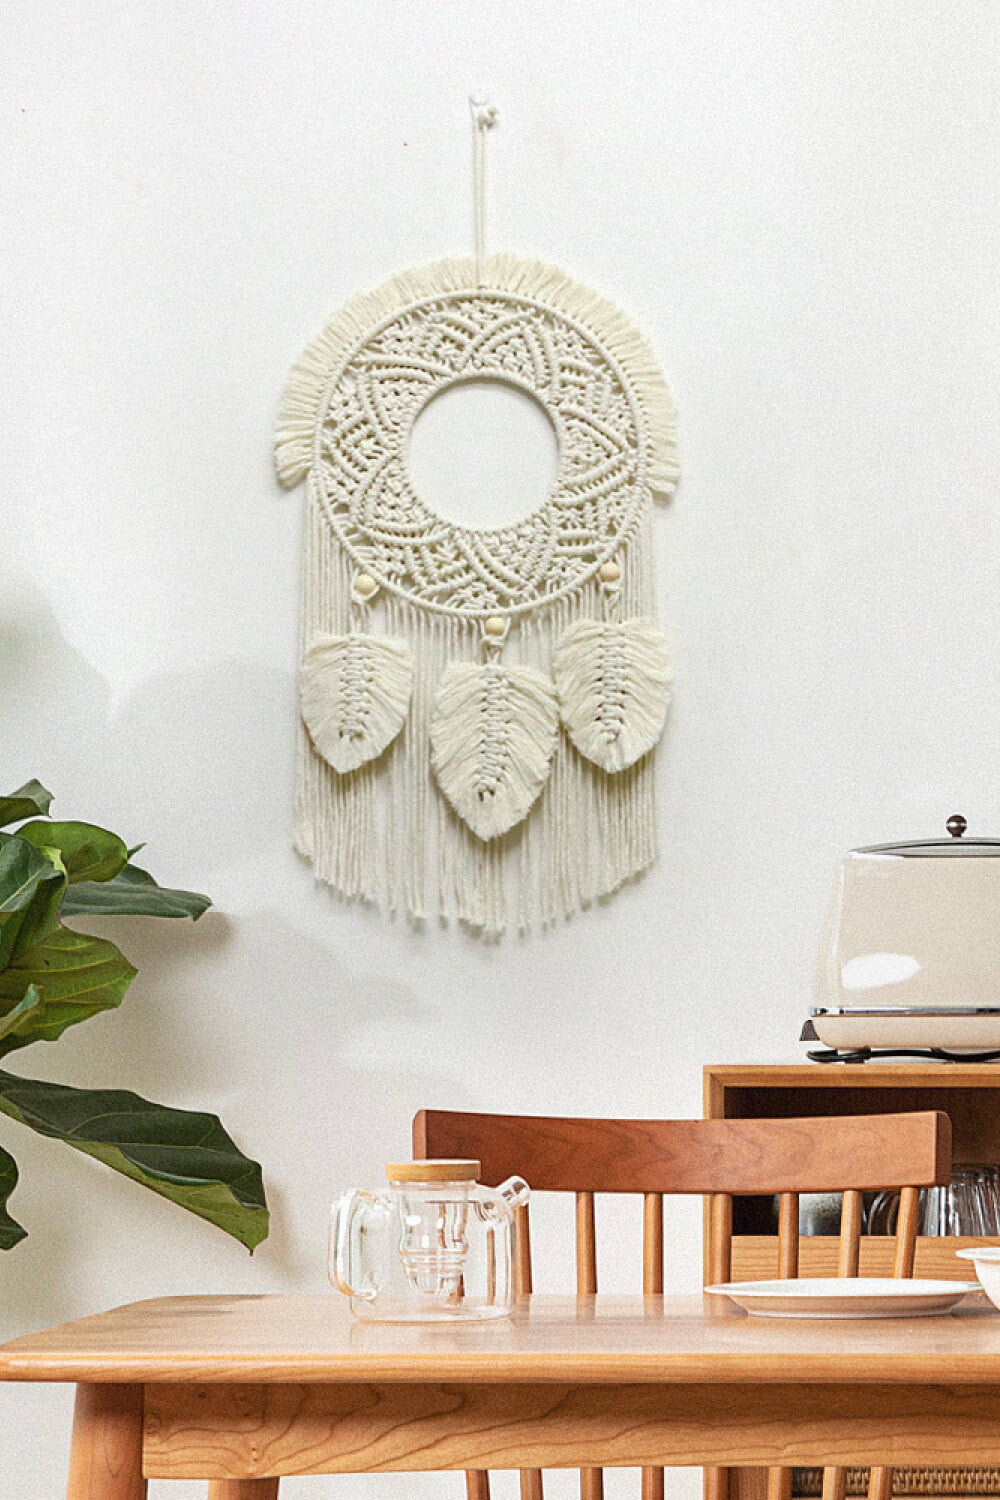 Antique White Hand-Woven Fringe Macrame Wall Hanging Sentient Beauty Fashions Home Decor